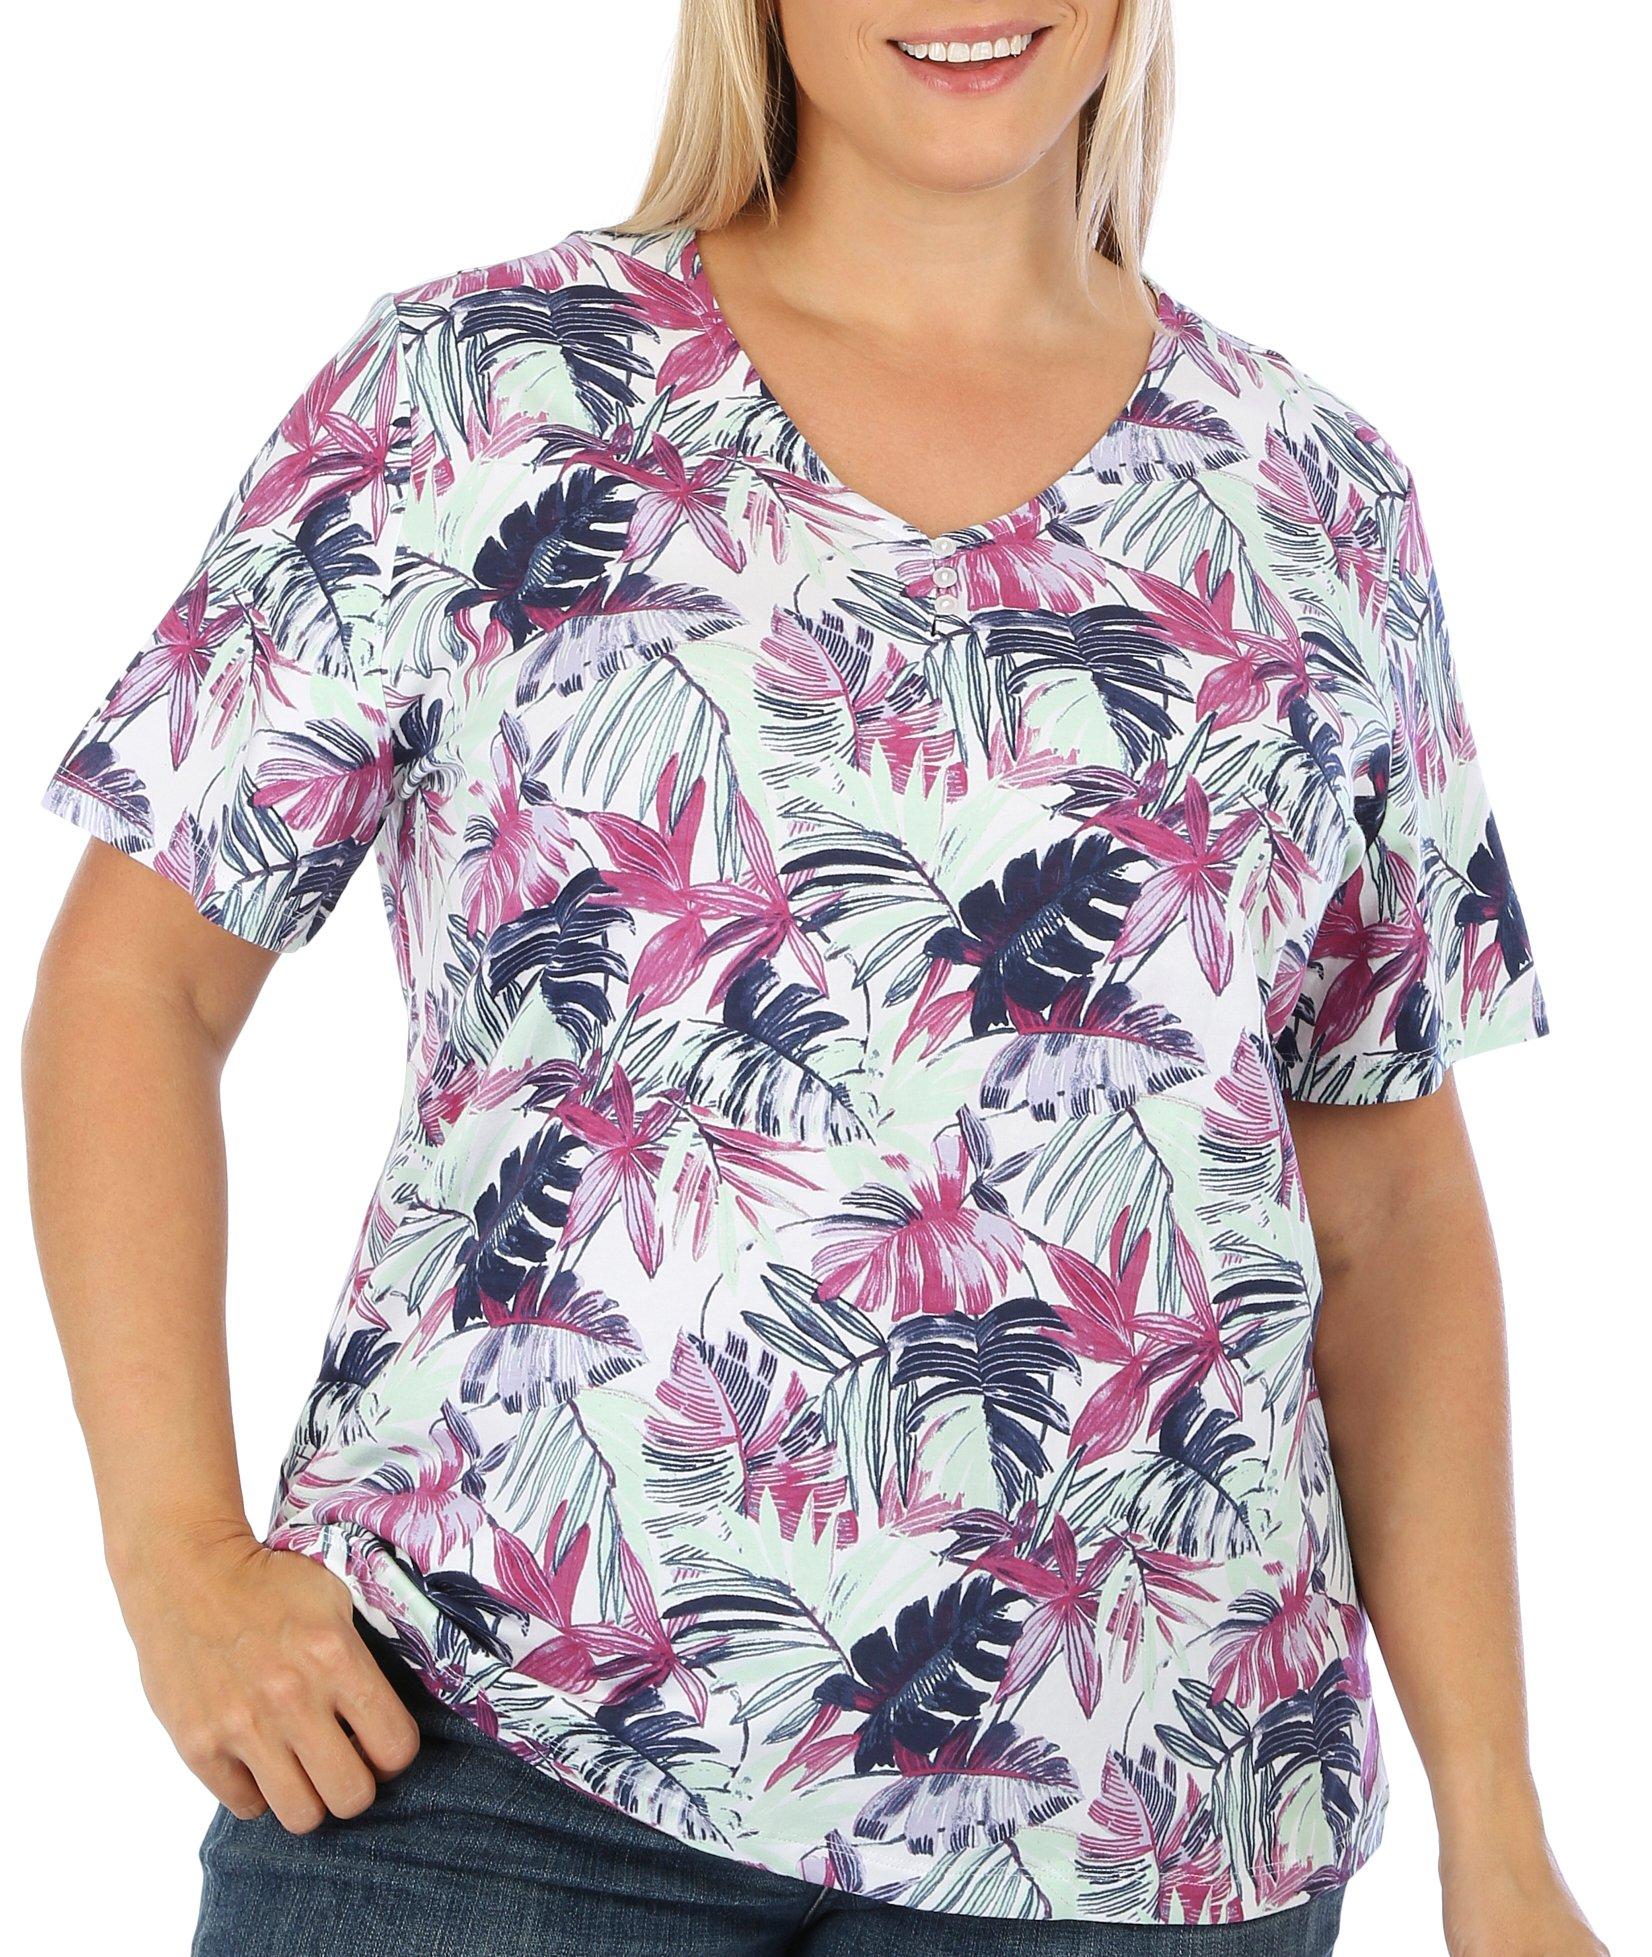 Coral Bay Plus Frond Print Henley Short Sleeve